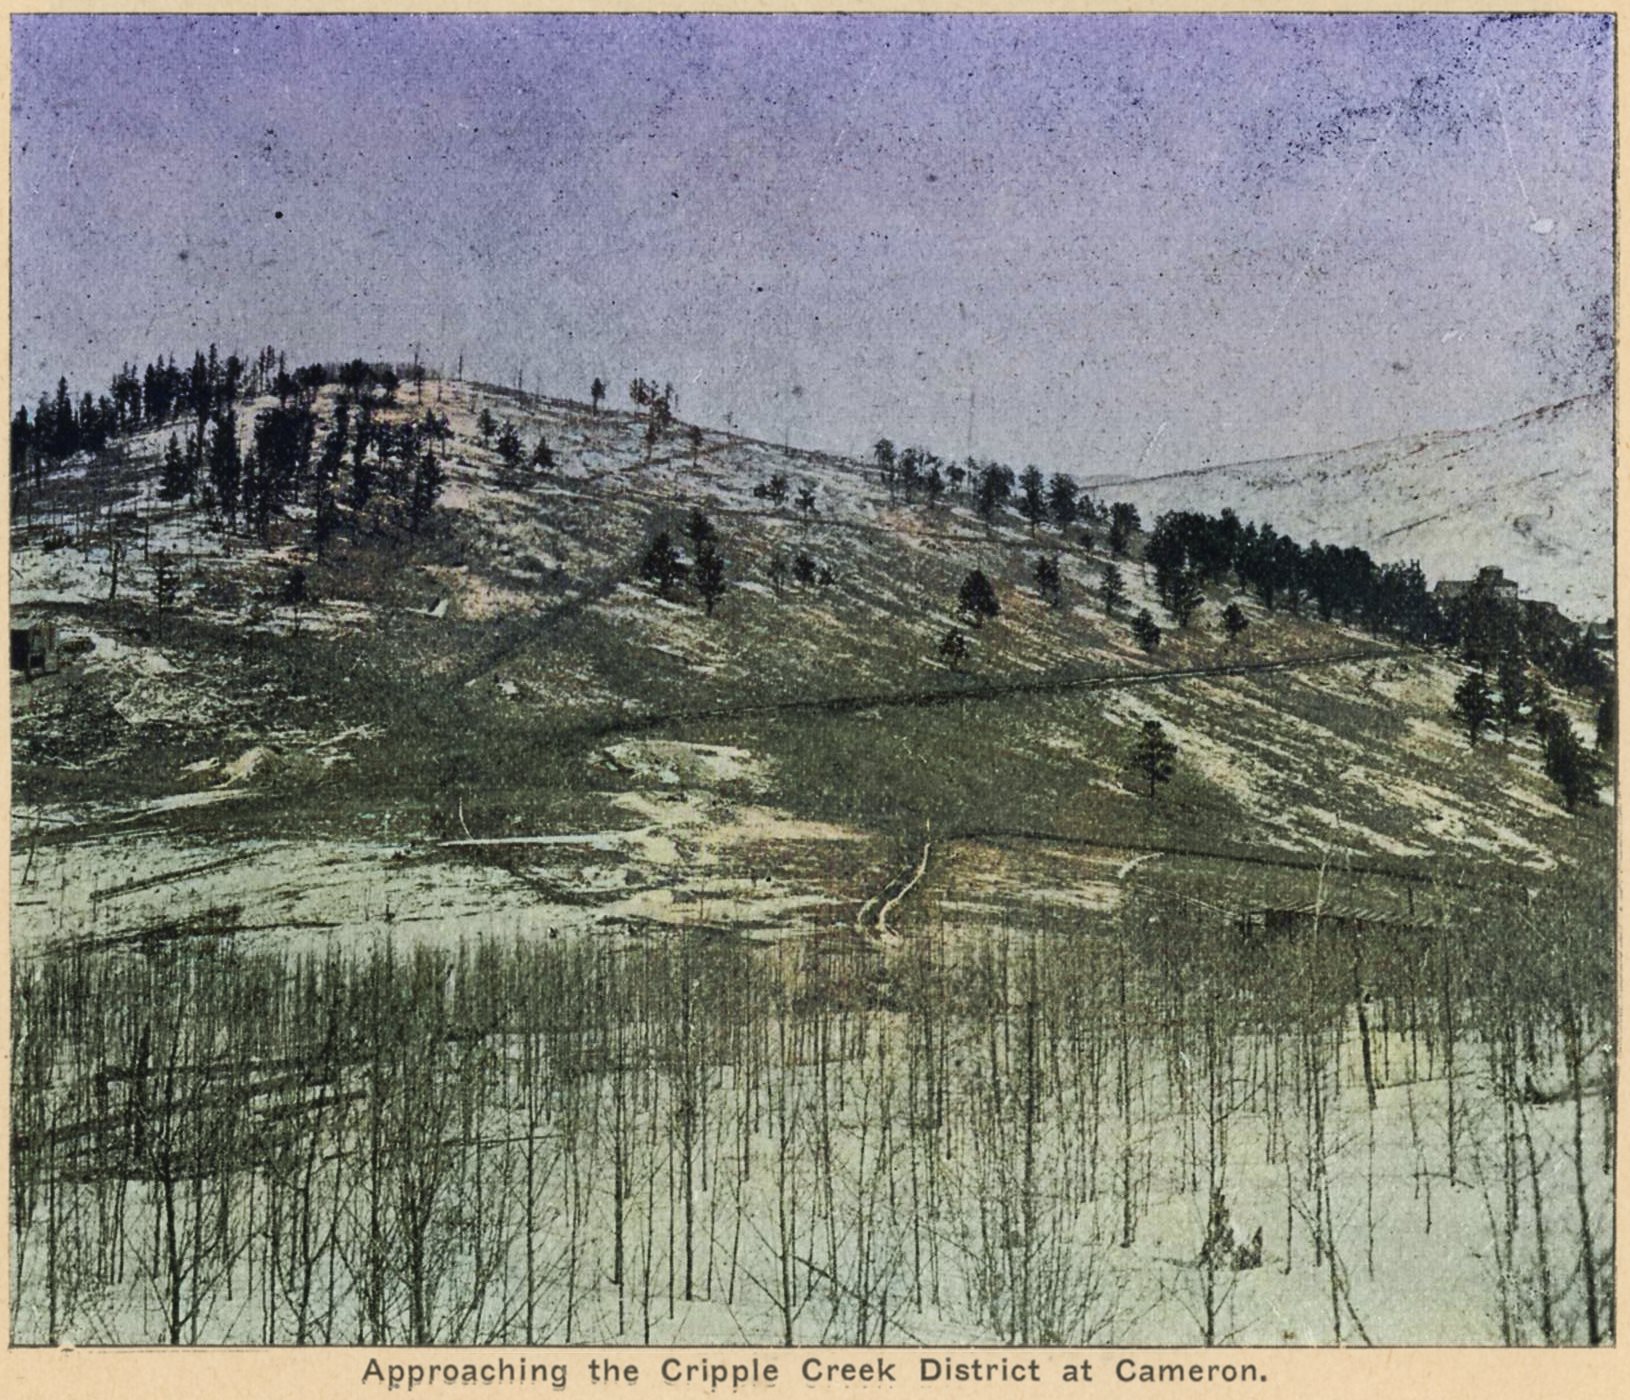 Battle Mountain from Squaw Mountain. [Erroneous titled 'Approaching the Cripple Creek District at Cameron' in source]